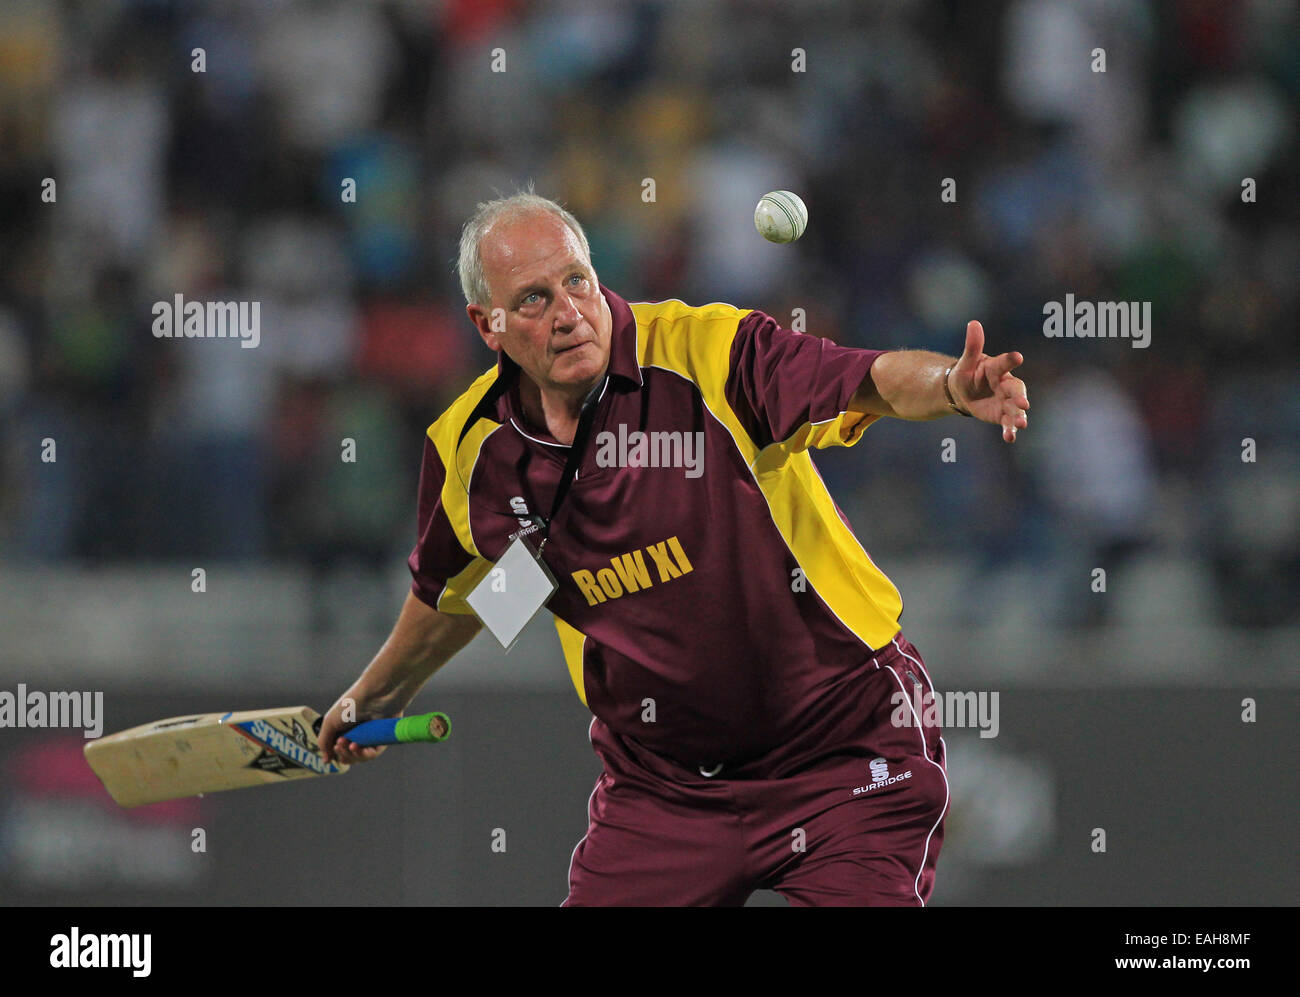 Cricket - England's John Emburey leads catching practice during the match between a World XI & an Asia XI in Doha, Qatar Stock Photo